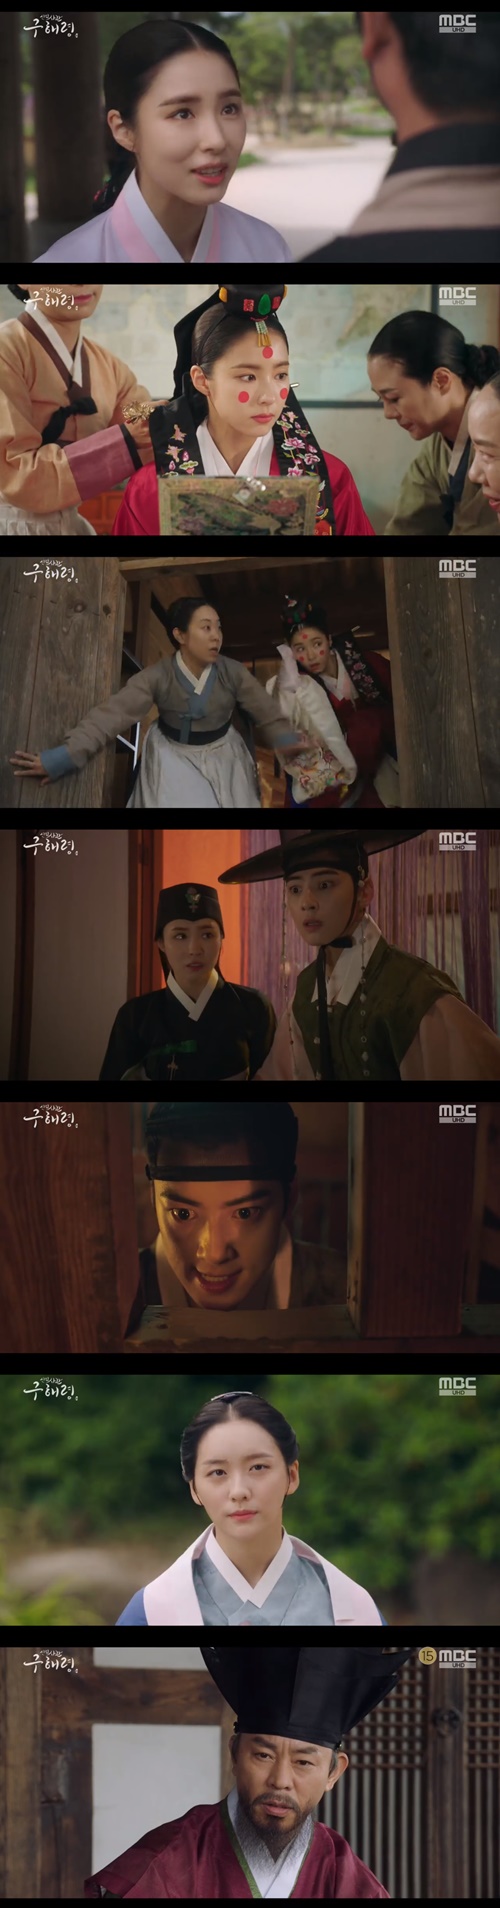 New cadet Rookie Historian Goo Hae-ryung Shin Se-kyung took off his wedding dress and challenged the starry, and Cha Eun-woo vowed revenge on Shin Se-kyung.With the rapid development, the attention of viewers was focused again.In New Entrance Officer Rookie Historian Goo Hae-ryung broadcast on the 18th, Rookie Historian Goo Hae-ryung (Shin Se-kyung) escaped the wedding ceremony.Lee Rim (Cha Eun-woo) noticed that Rookie Historian Goo Hae-ryung had posed for himself.Rookie Historian Goo Hae-ryung was a bad actor, so I was more embarrassed to meet again.This was the same for Rookie Historian Goo Hae-ryung.So was you, without a head, a fraudster who makes money by pretending to be Plum, Irim told Rookie Historian Goo Hae-ryung.Rookie Historian Goo Hae-ryung said, I was Plum myself when I took Plum side. Lee Lim raised his voice saying, What is so proud of the subject of fraud?I am not the only one to be sorry, he said.Irim gushed to Rookie Historian Goo Hae-ryung, Those peoples hearts are the truth, they cant play with that money.Rookie Historian Goo Hae-ryung bowed to readers, saying, Im not Plum, I pretended to be Plum and deceived you; Im sorry.The real Plum teacher is coming, he said, looking at Rookie Historian Goo Hae-ryung.Then suddenly, the money department said, Take Plum and confiscate the book.So Irim was in Danger to be caught, but Rookie Historian Goo Hae-ryung showed the base and seemed to save Irim from Danger.But Rookie Historian Goo Hae-ryung eventually pushed away when he became dangerous to himself.Irim was imprisoned for a while and vowed to revenge Rookie Historian Goo Hae-ryung.Heo Sam-bo (Sung Ji-ru) saved Lee Lim from Danger, false claim that he was Plum to save Lee Lim.Meanwhile, women also had a chance to have a farewell poem. Lee Cho Jung-rangs daughter, Sahee (Park Ji-hyun), said, I will have a farewell poem.Please persuade my father, he said, visiting Min Ik-pyeong (Choi Deok-moon).The wedding ceremony of Rookie Historian Goo Hae-ryung came up.Rookie Historian Goo Hae-ryung, who had no desire to marry, sneaked away from his brother, Koo Jae-kyung (Fairy Hwan).Rookie Historian Goo Hae-ryung boldly took off his wedding dress and headed for a breathtaking run was where Mrs.Rookie Historian Goo Hae-ryung showed a determined eye after arriving at the test site in the past, saying, Mrs.While Shin Se-kyung has been motivated by past tests, Park Ji-hyun also said he will take a separate session.I wondered if the rivalry of the two people would be drawn.Cha Eun-woo also felt more offended by Shin Se-kyungs escape from Danger, abandoning himself beyond his Plum posing.It is also noteworthy what opportunities they will face.Photo MBC broadcast screen capture